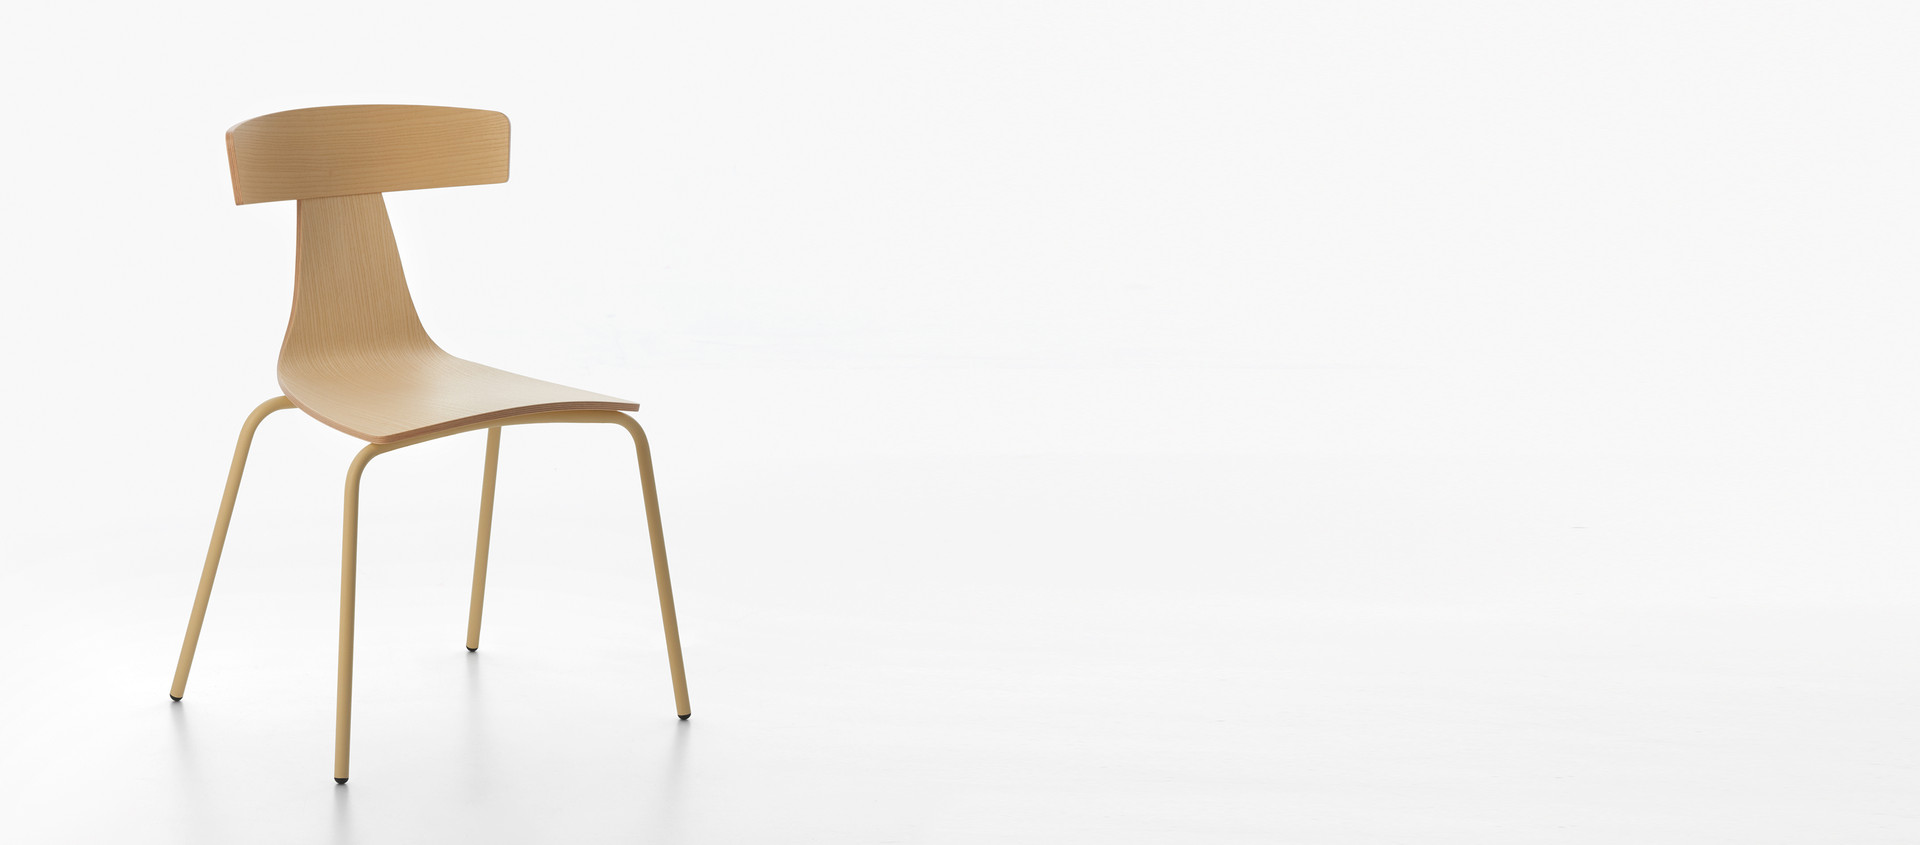 HERO - PLANK REMO wood chair, metal structure